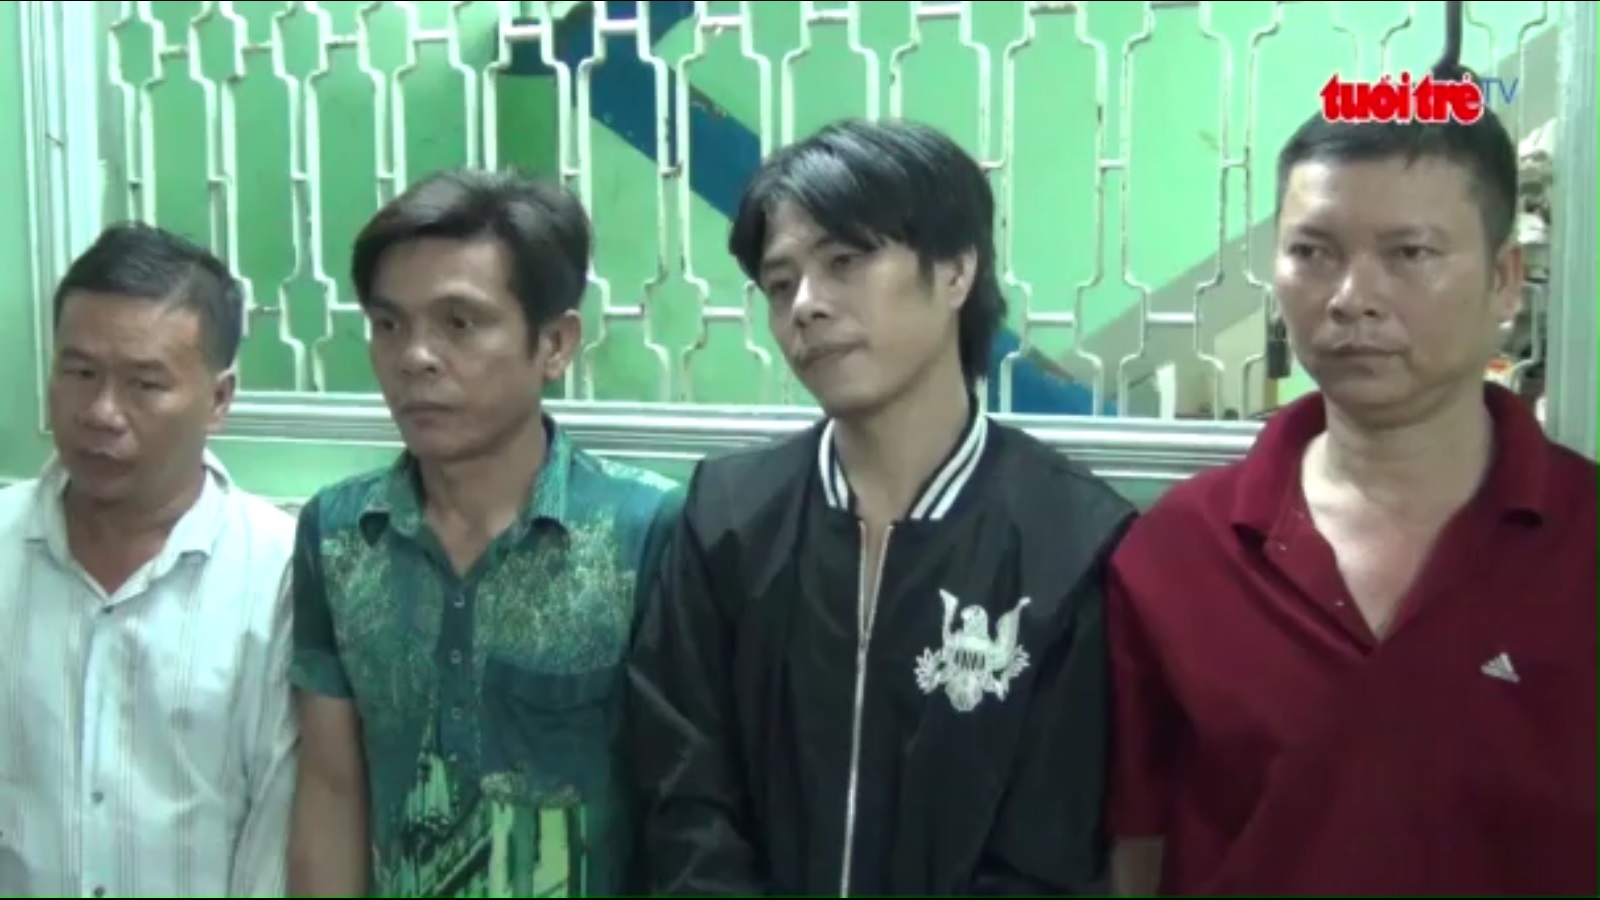 Vietnamese gang accused of Malaysian tourist robbery captured in Ho Chi Minh City